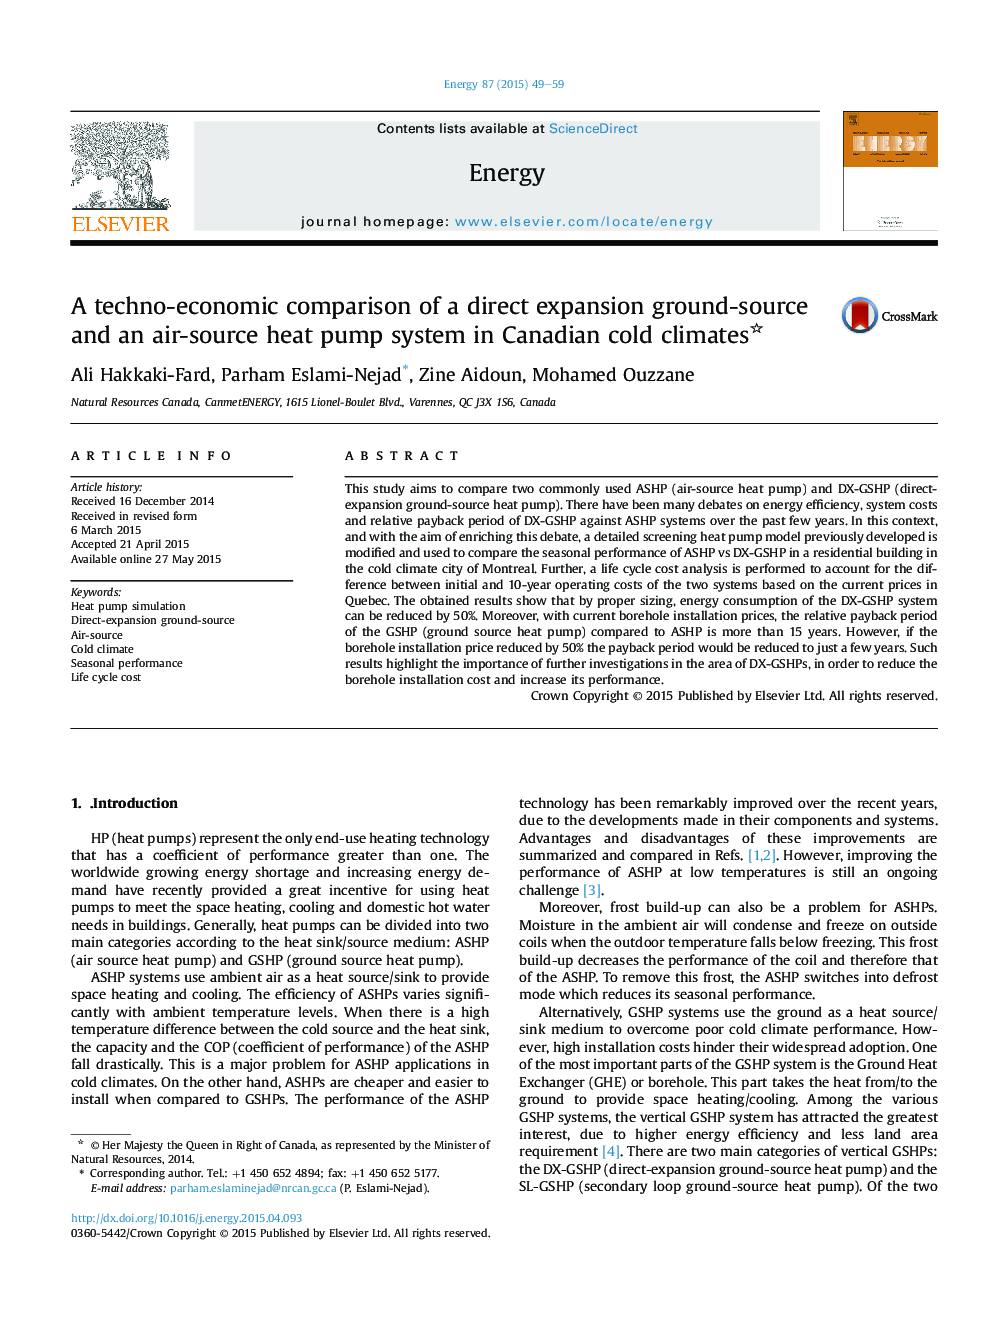 A techno-economic comparison of a direct expansion ground-source and an air-source heat pump system in Canadian cold climates 